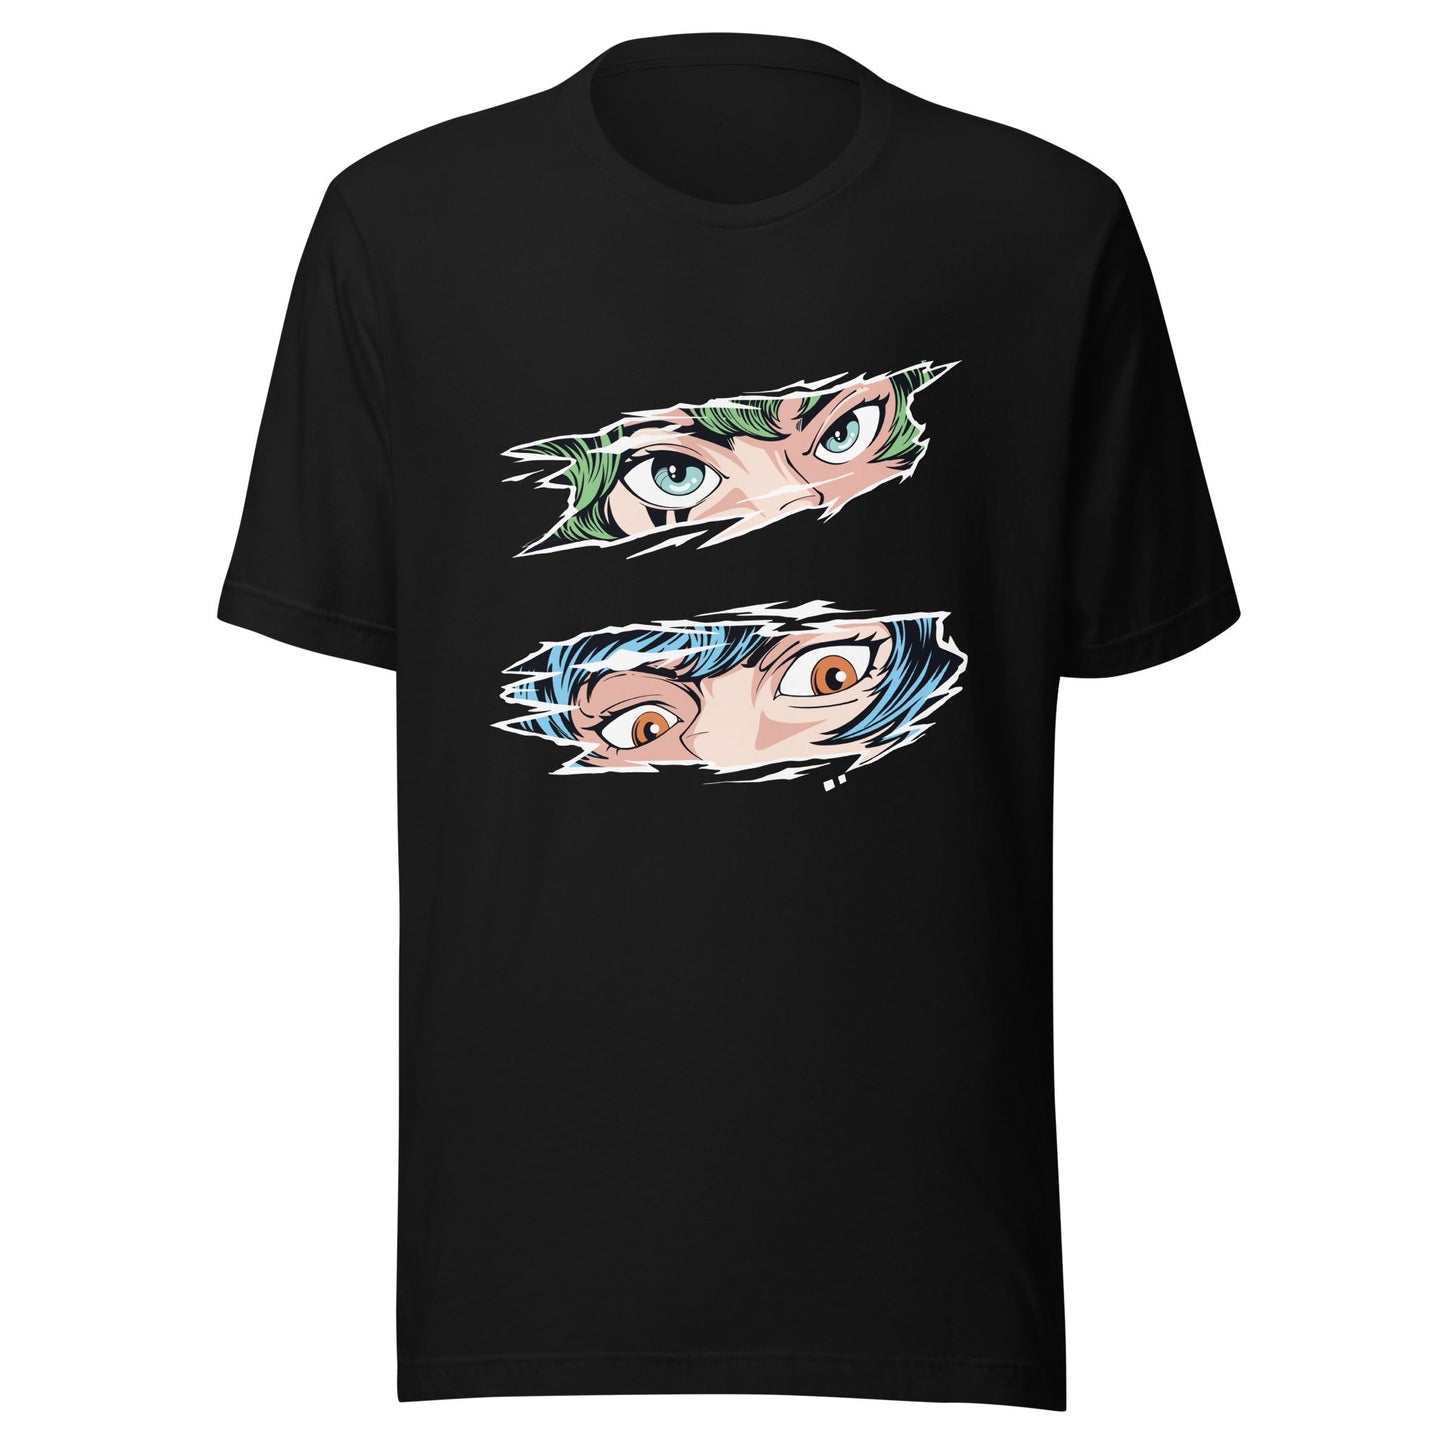 Anime Eye T-Shirt - Express Your Unique Style with Eye-Catching Designs